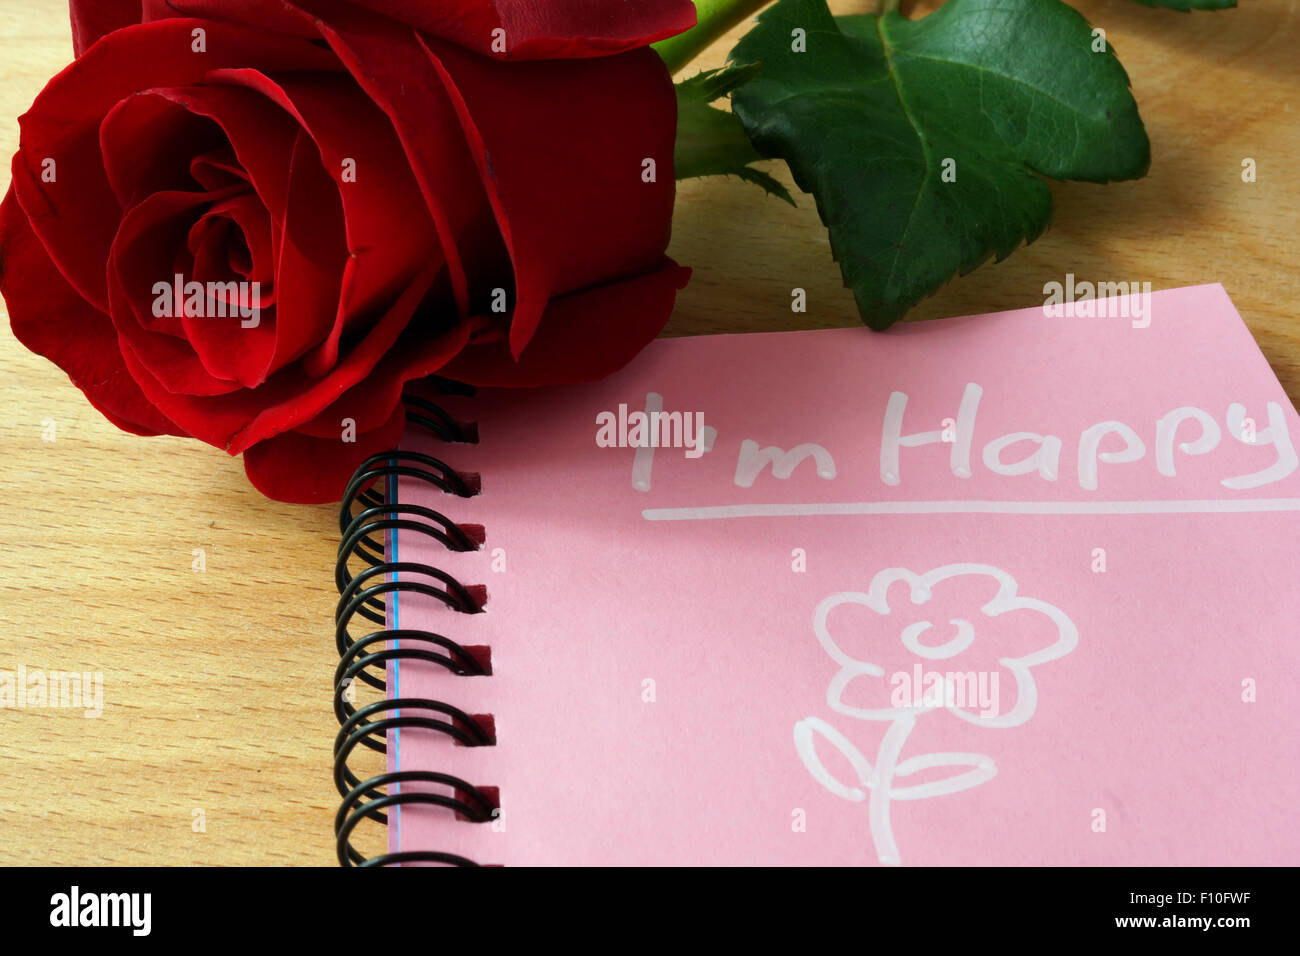 Pink notepad with I am happy and rose on a wooden background. Stock Photo